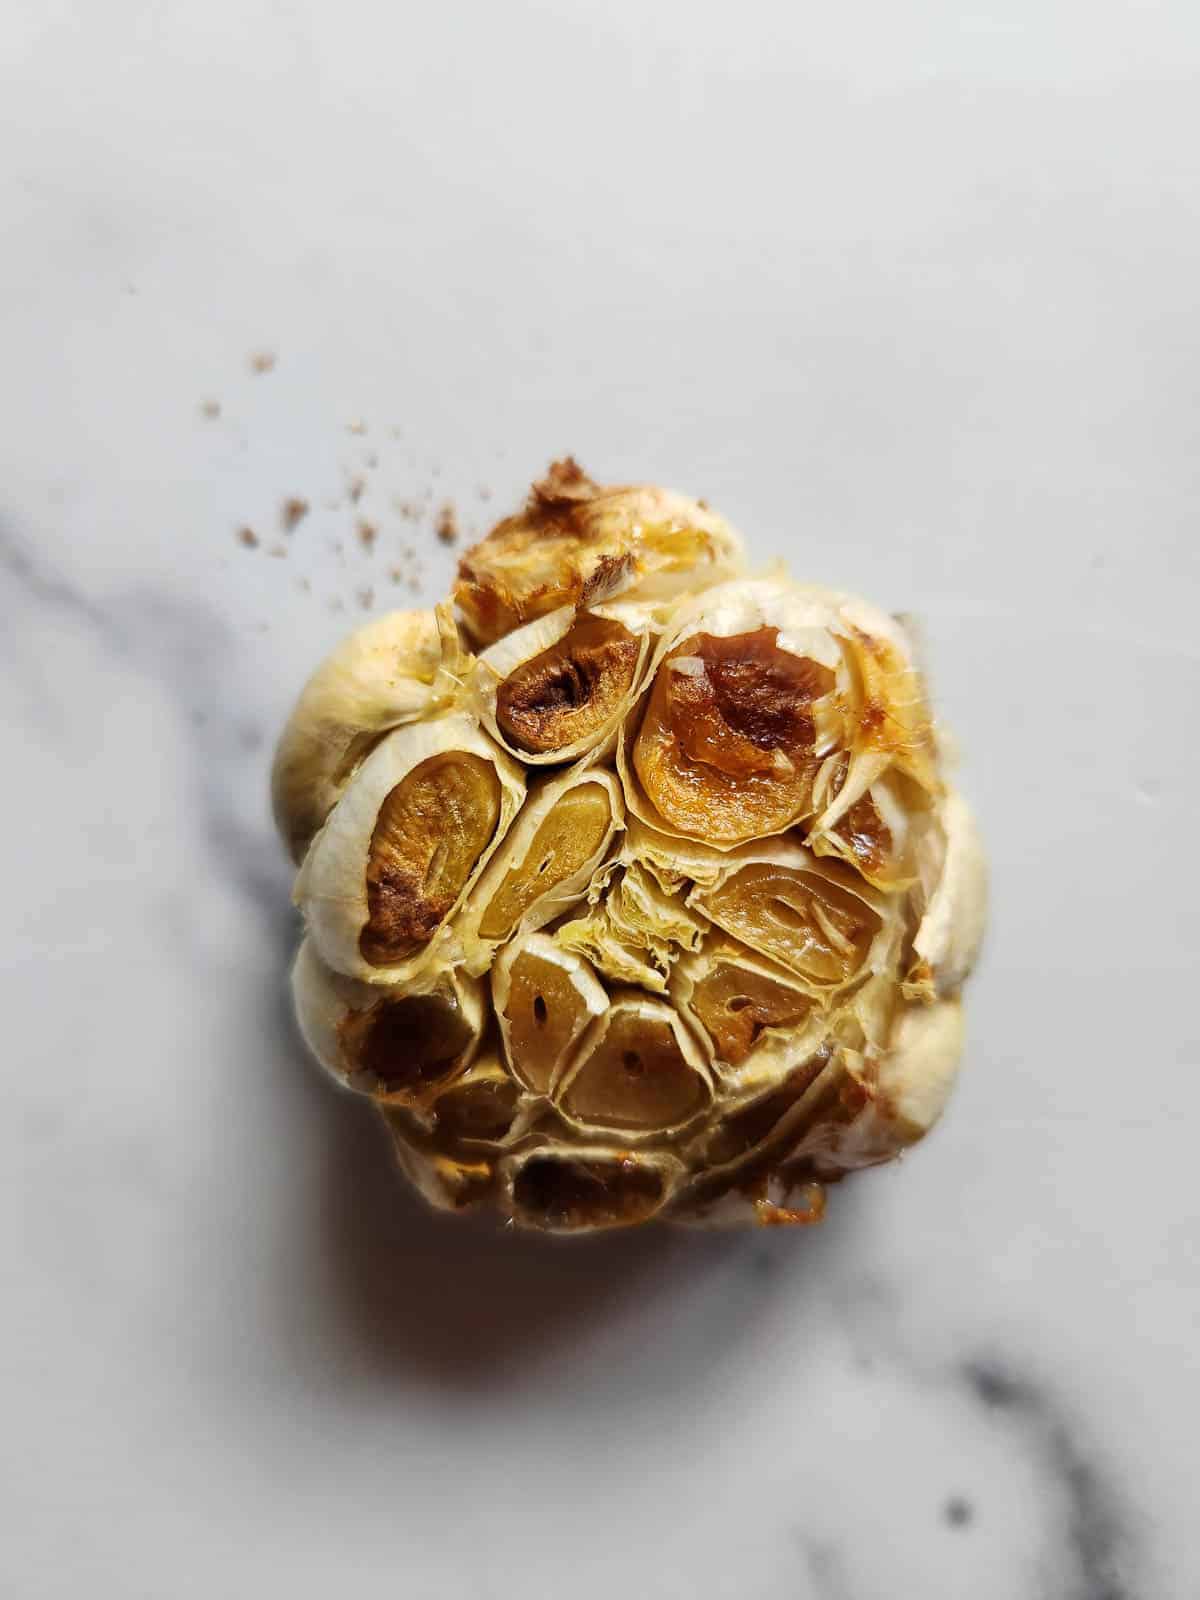 Oven-roasted garlic on a white background.